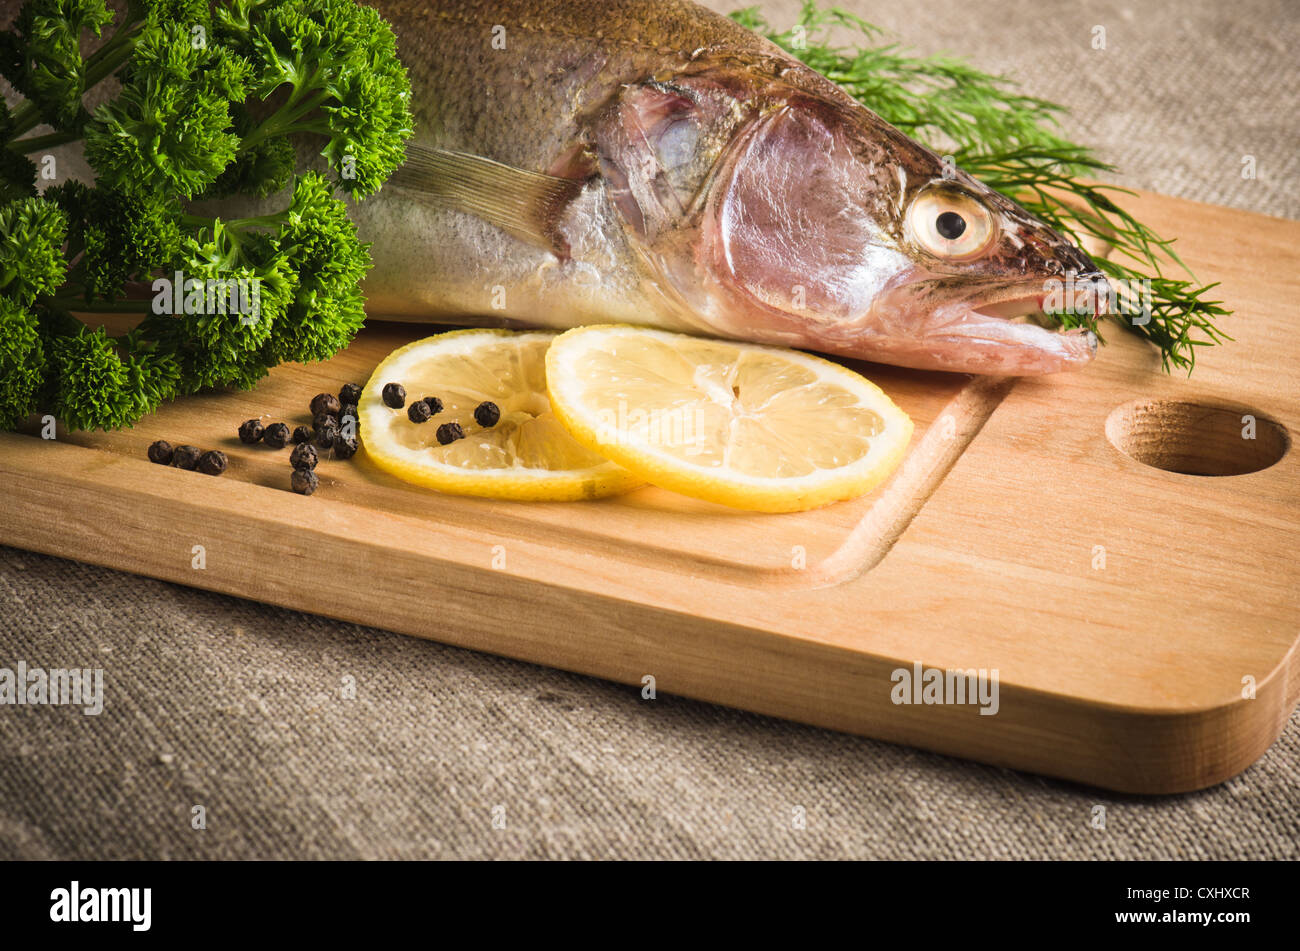 Pike perch on a wooden kitchen board Stock Photo